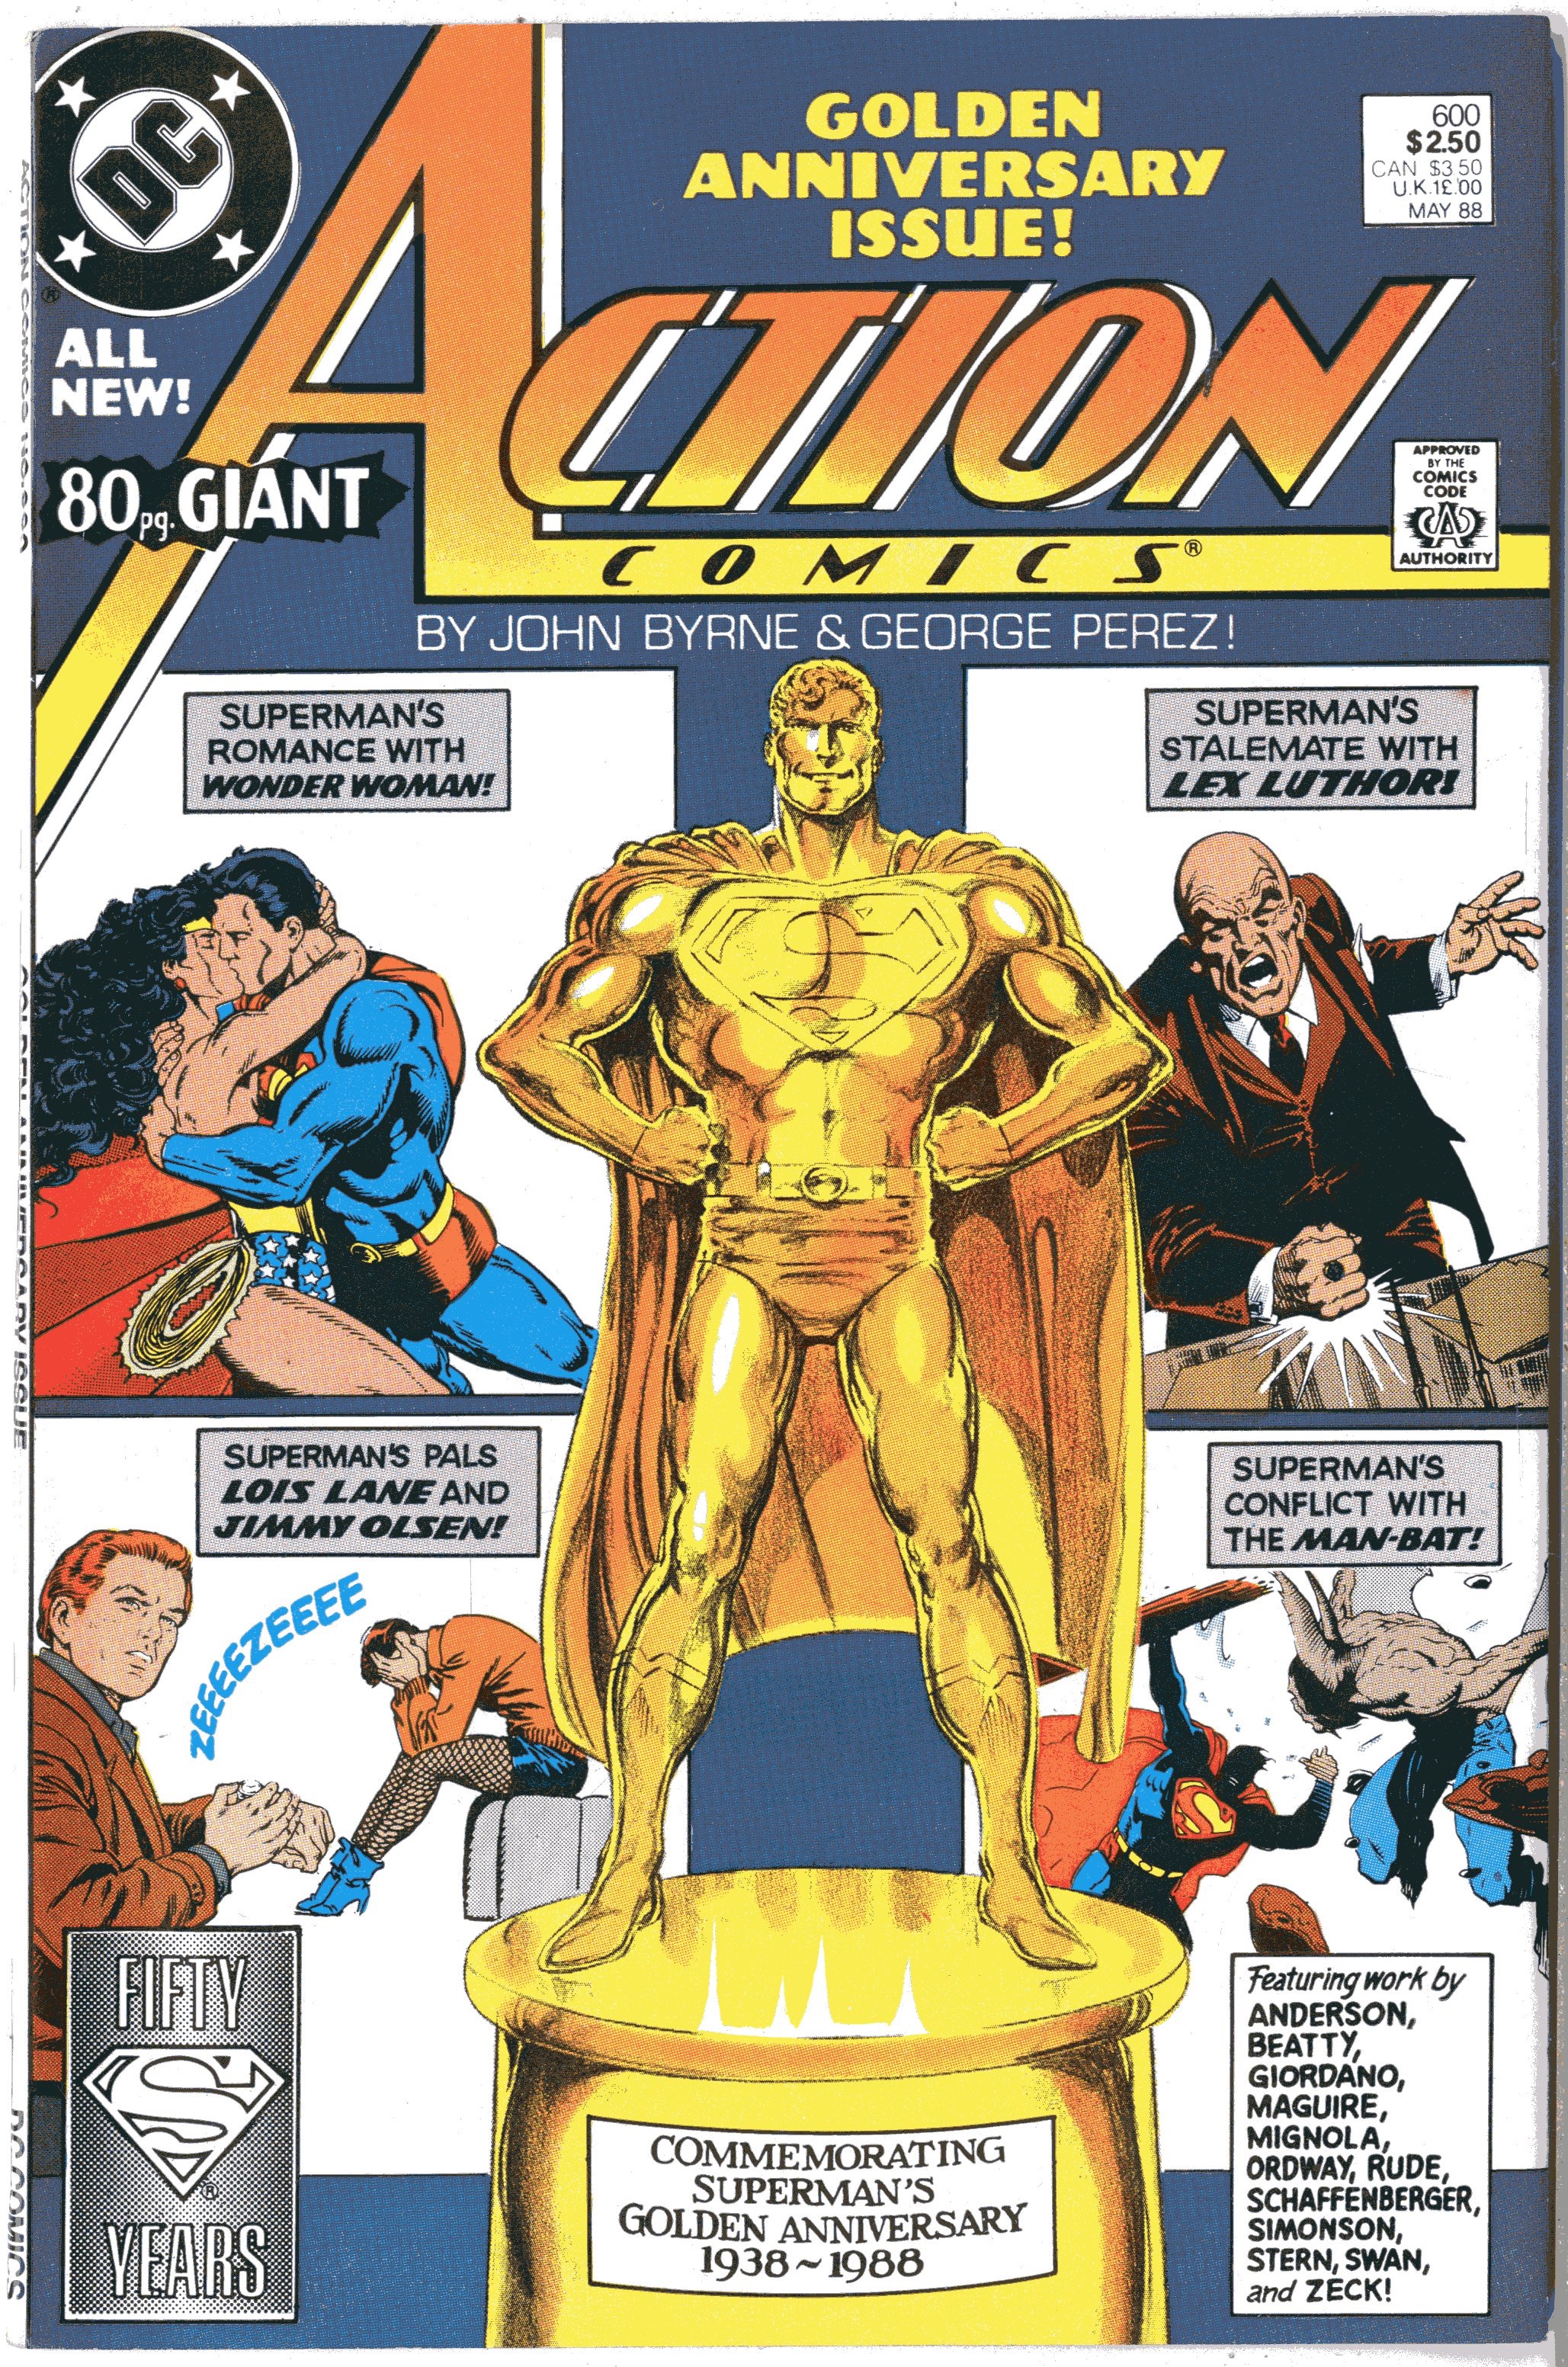 Action  80 Page Giant  Golden Anniversary Issue - Primary